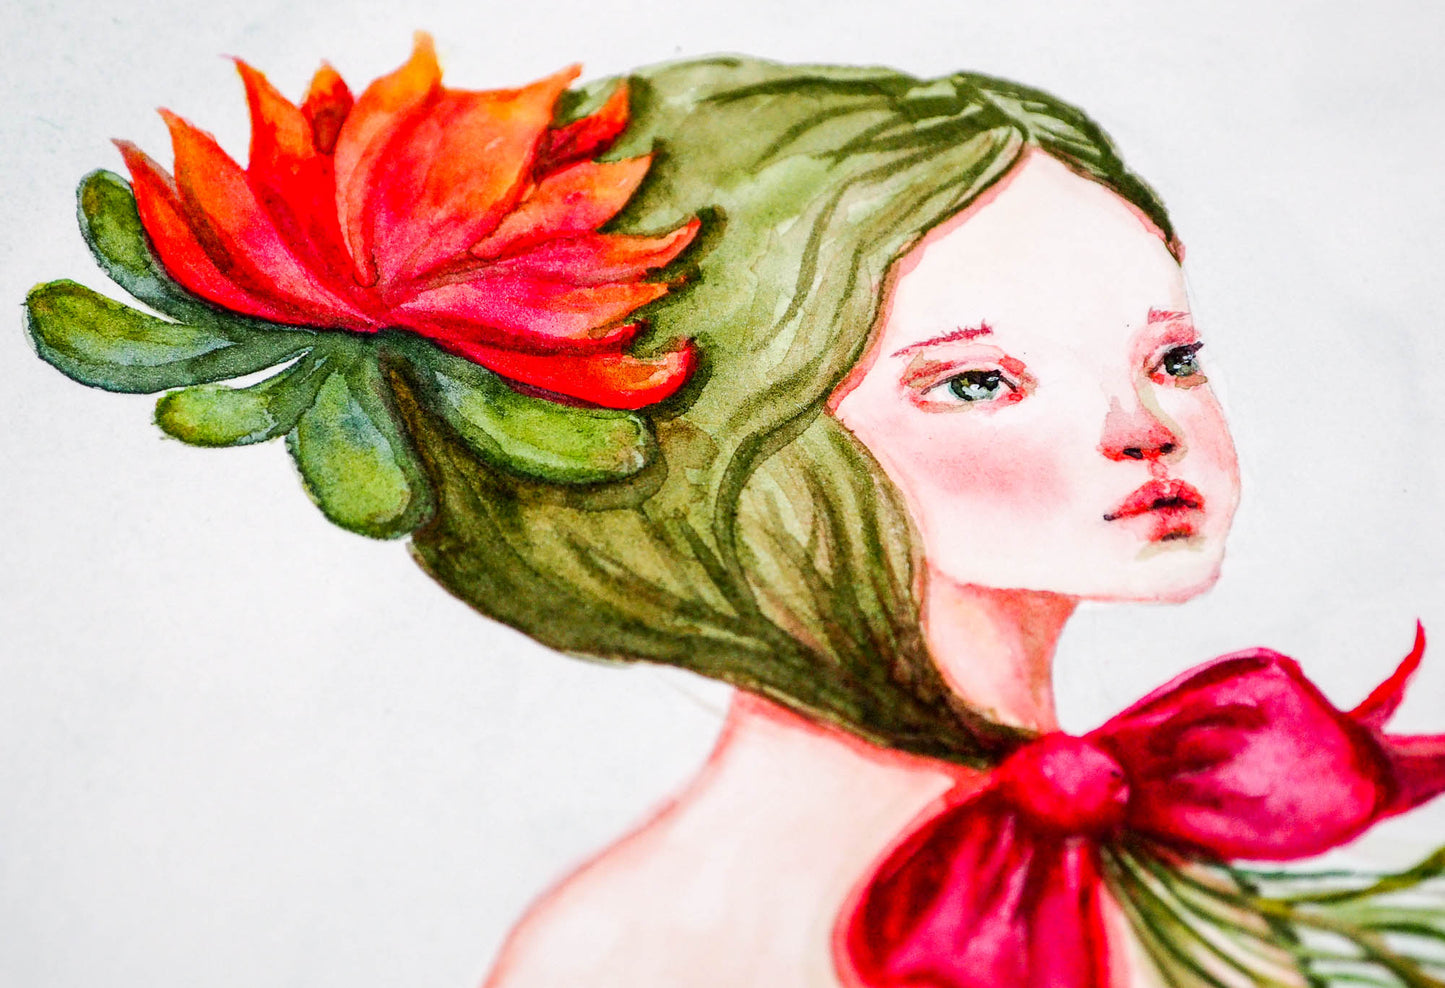 Inspired by Spring, Danita created an astonishing watercolor painting. A naked girl, in touch with her inner nature as she blooms into the world.